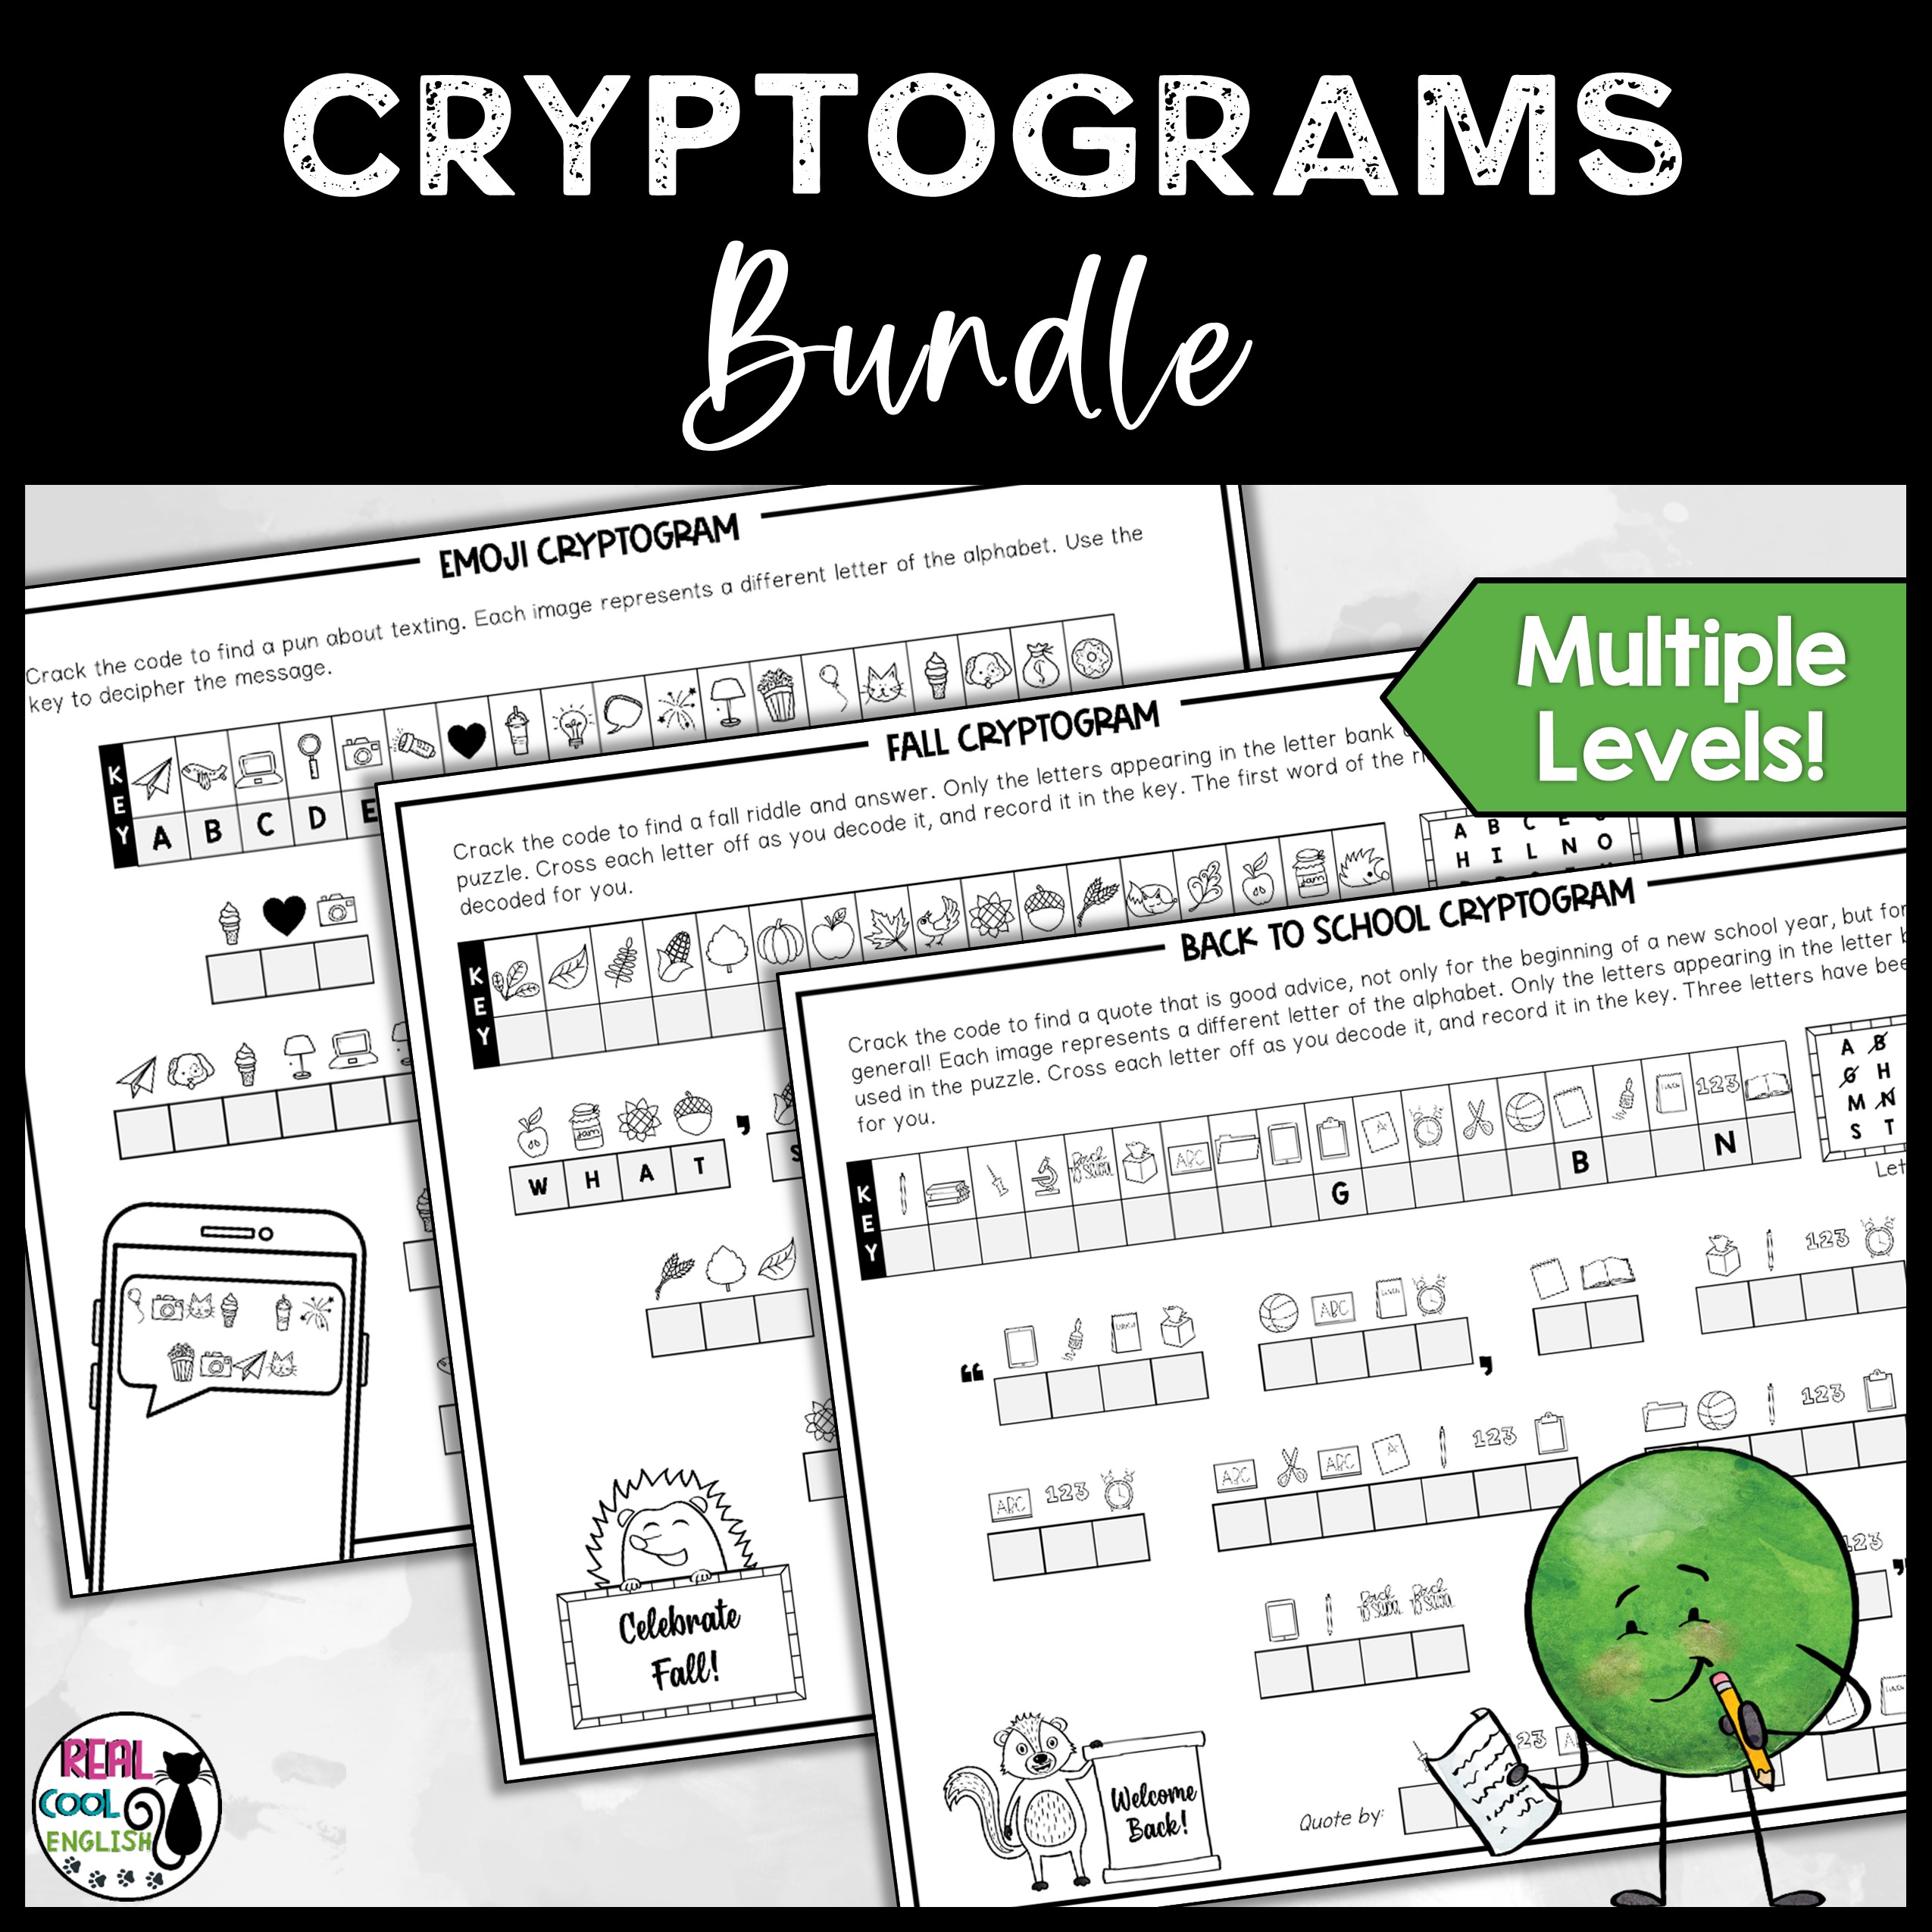 Image for benefits of cryptogram - cover image for growing bundle of cryptogram puzzles